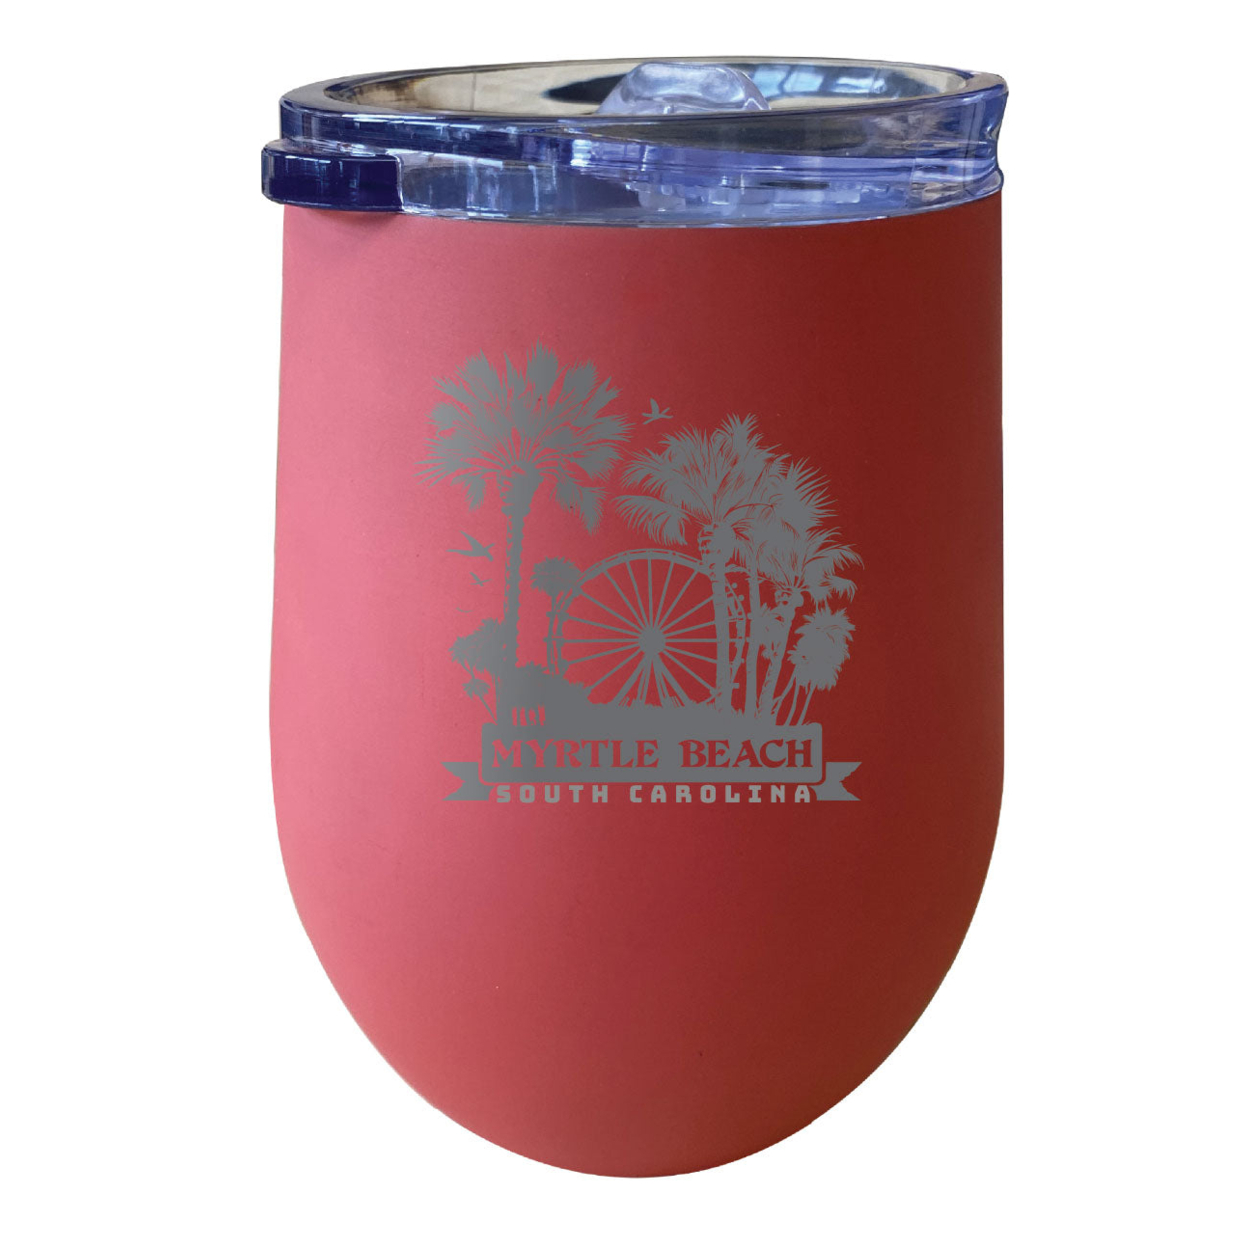 Myrtle Beach South Carolina Laser Etched Souvenir 12 Oz Insulated Wine Stainless Steel Tumbler - White